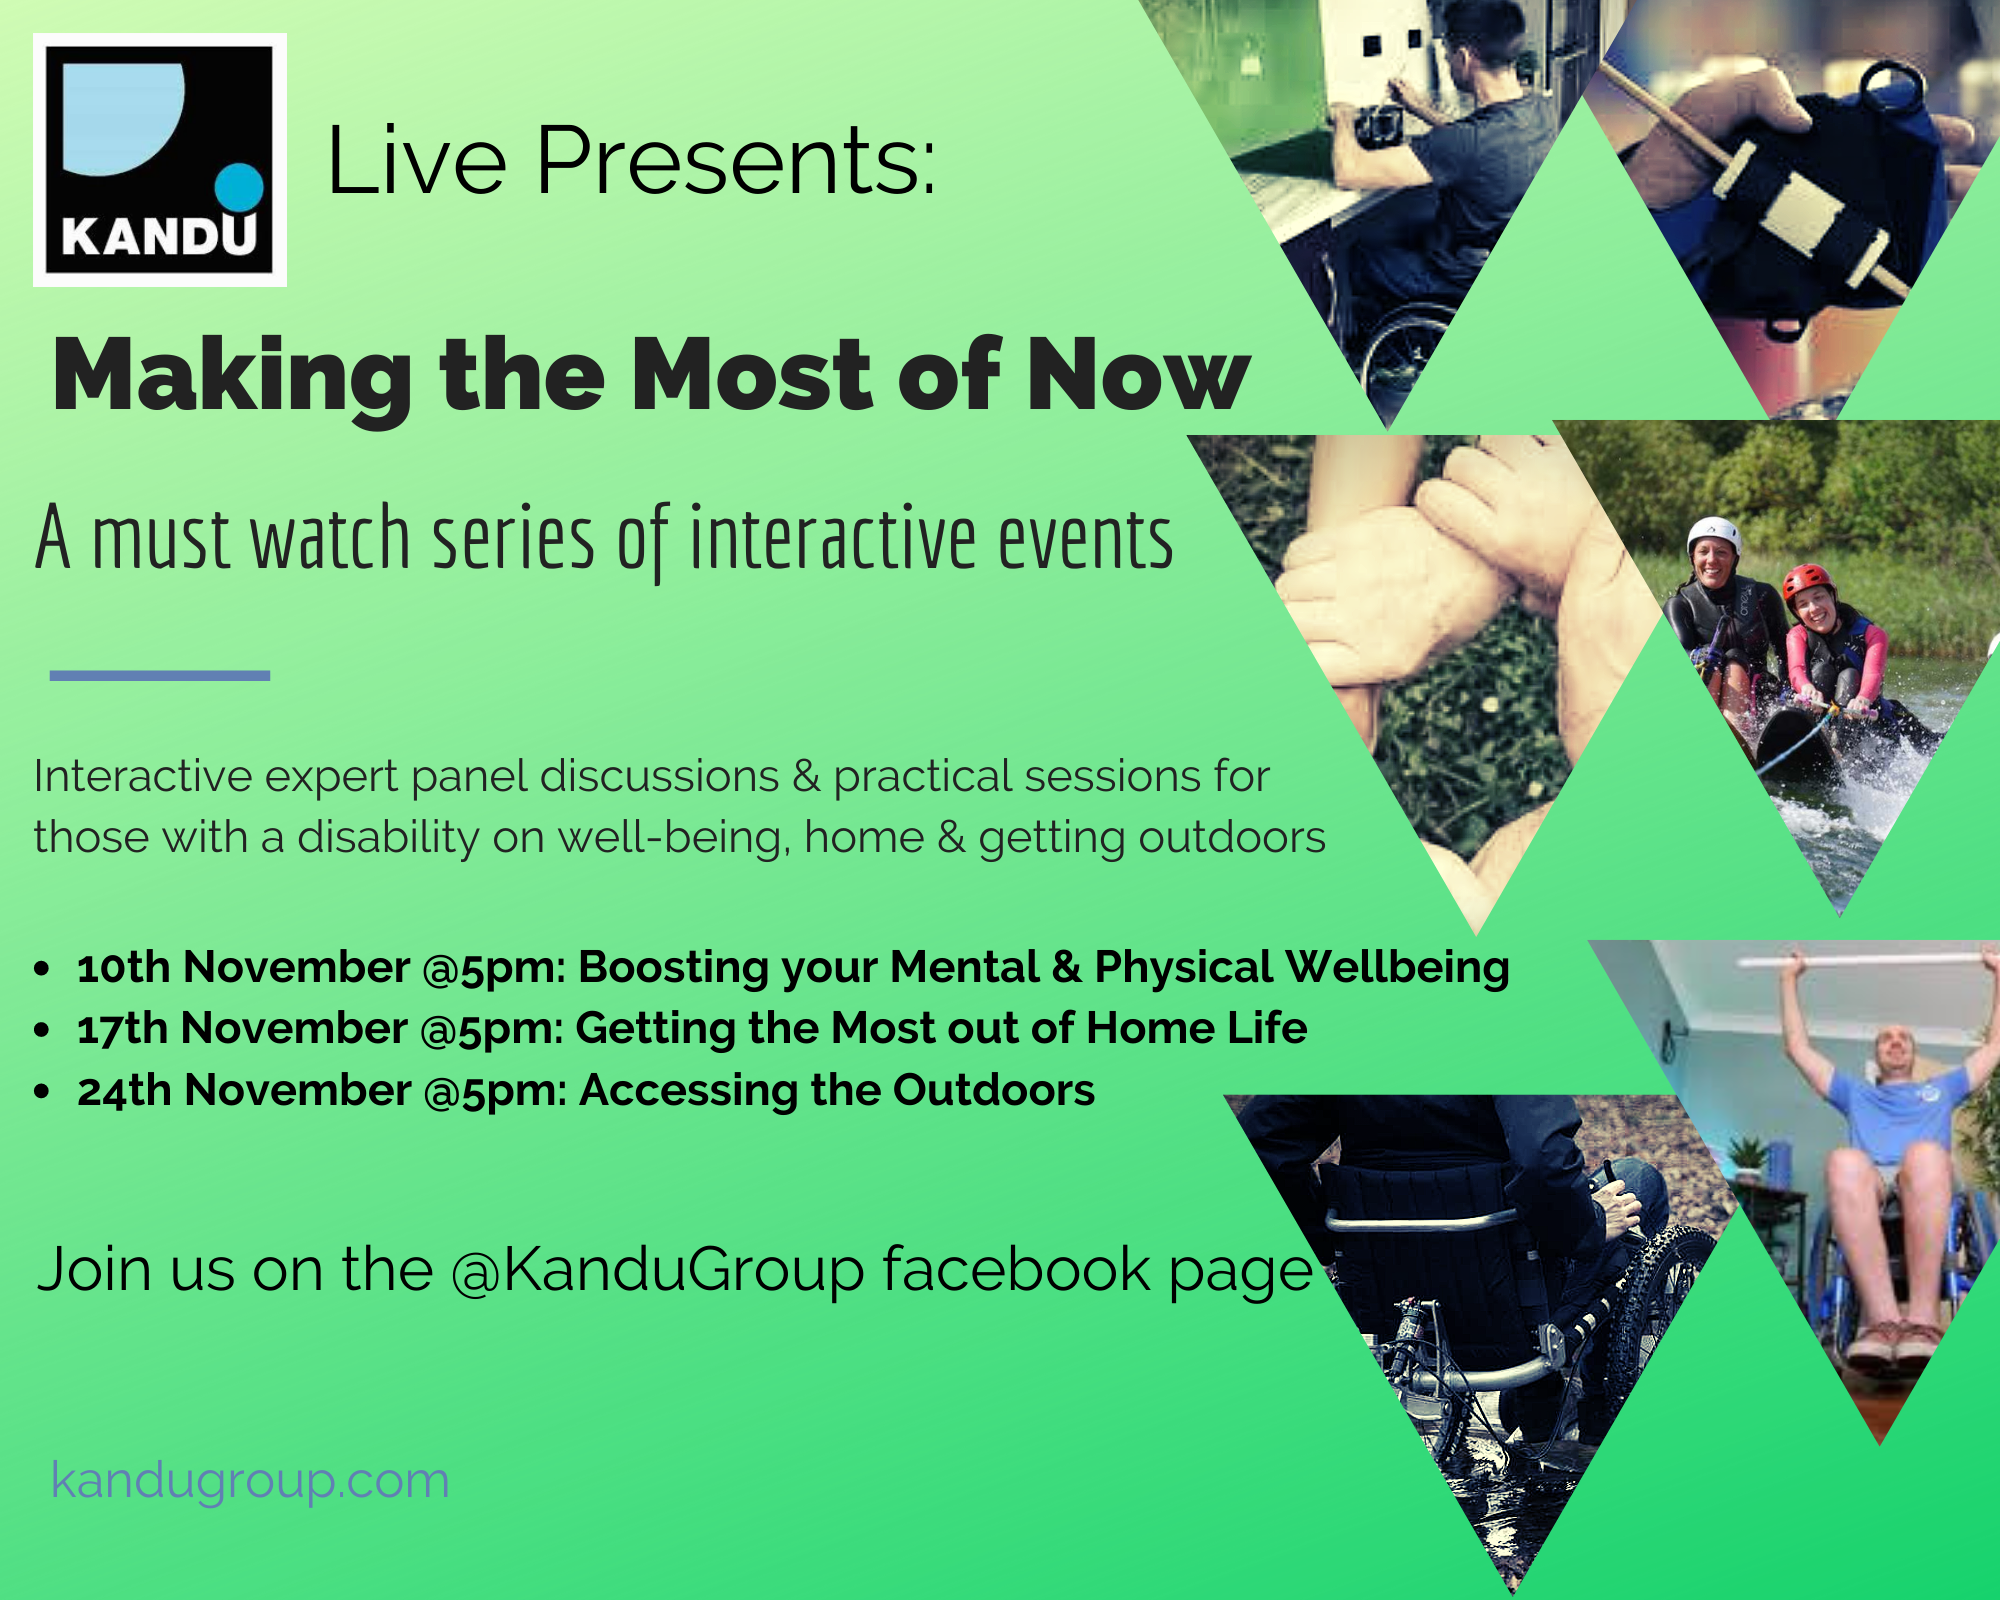 JOIN US for a series of must-watch online events this November